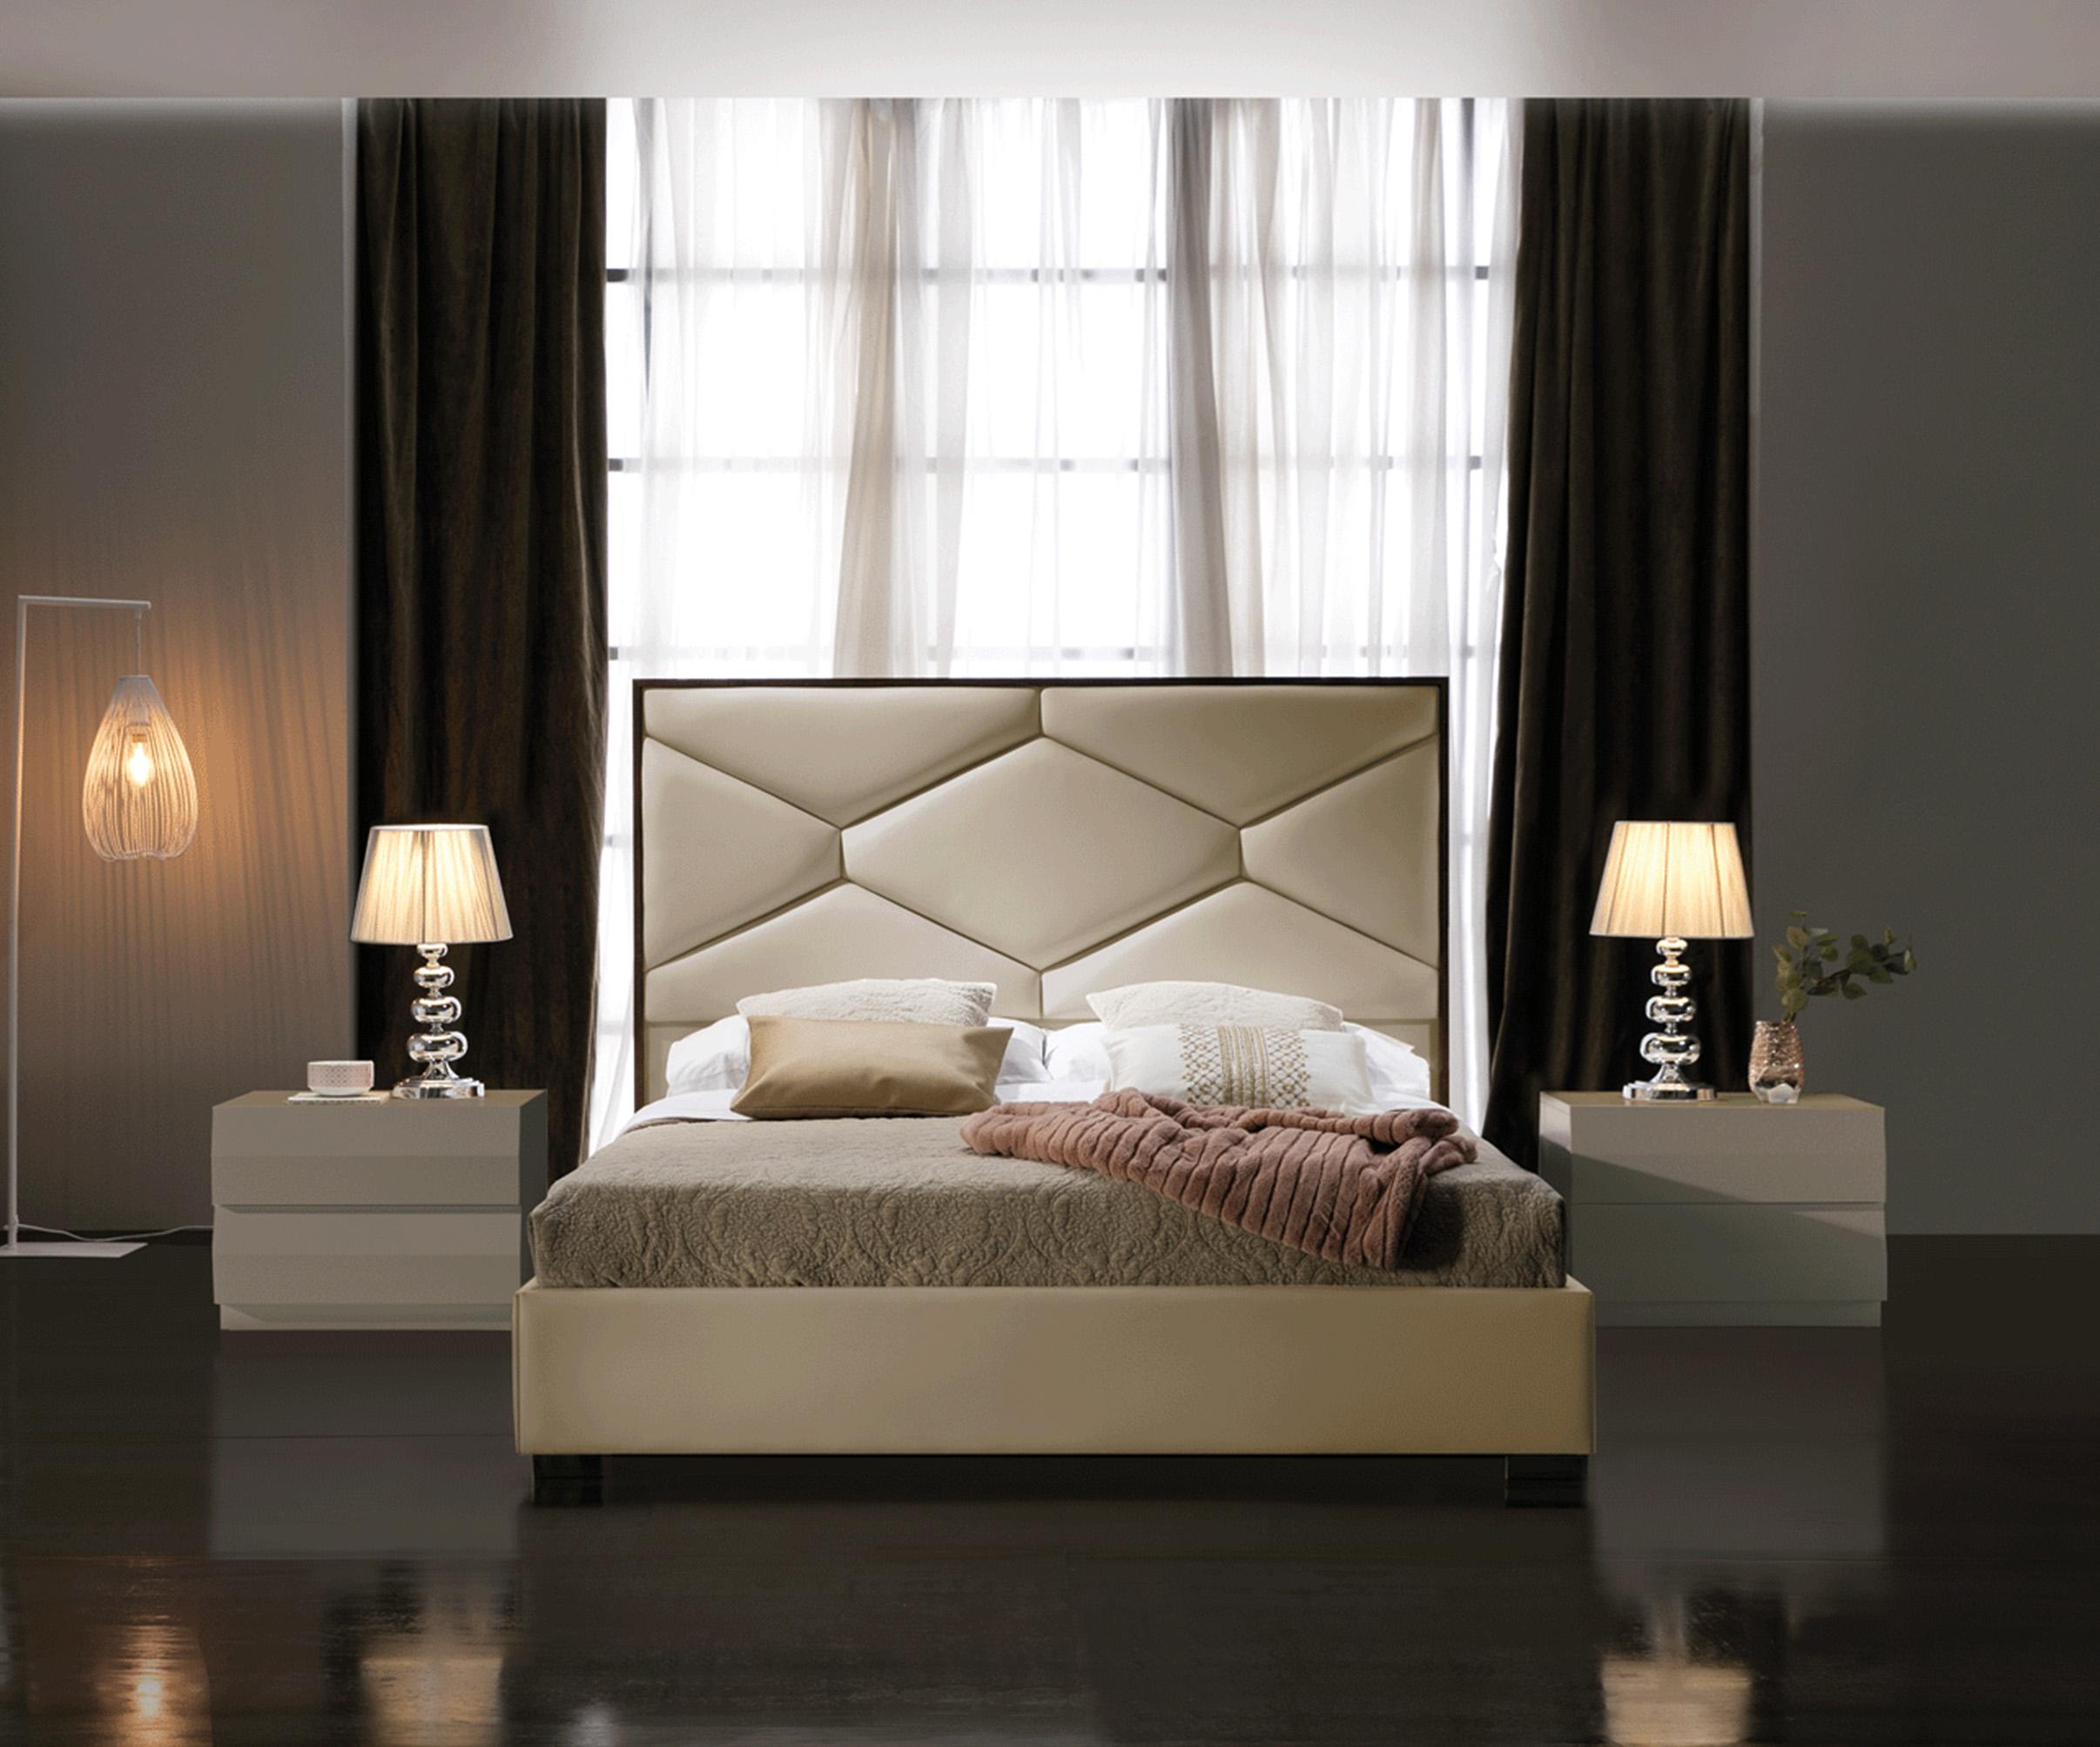 

    
MARTINABEDQS-2NDM-5PC Beige Eco Leather Queen Storage Bedroom Set 5Pcs MARTINA ESF Modern DUPEN SPAIN
